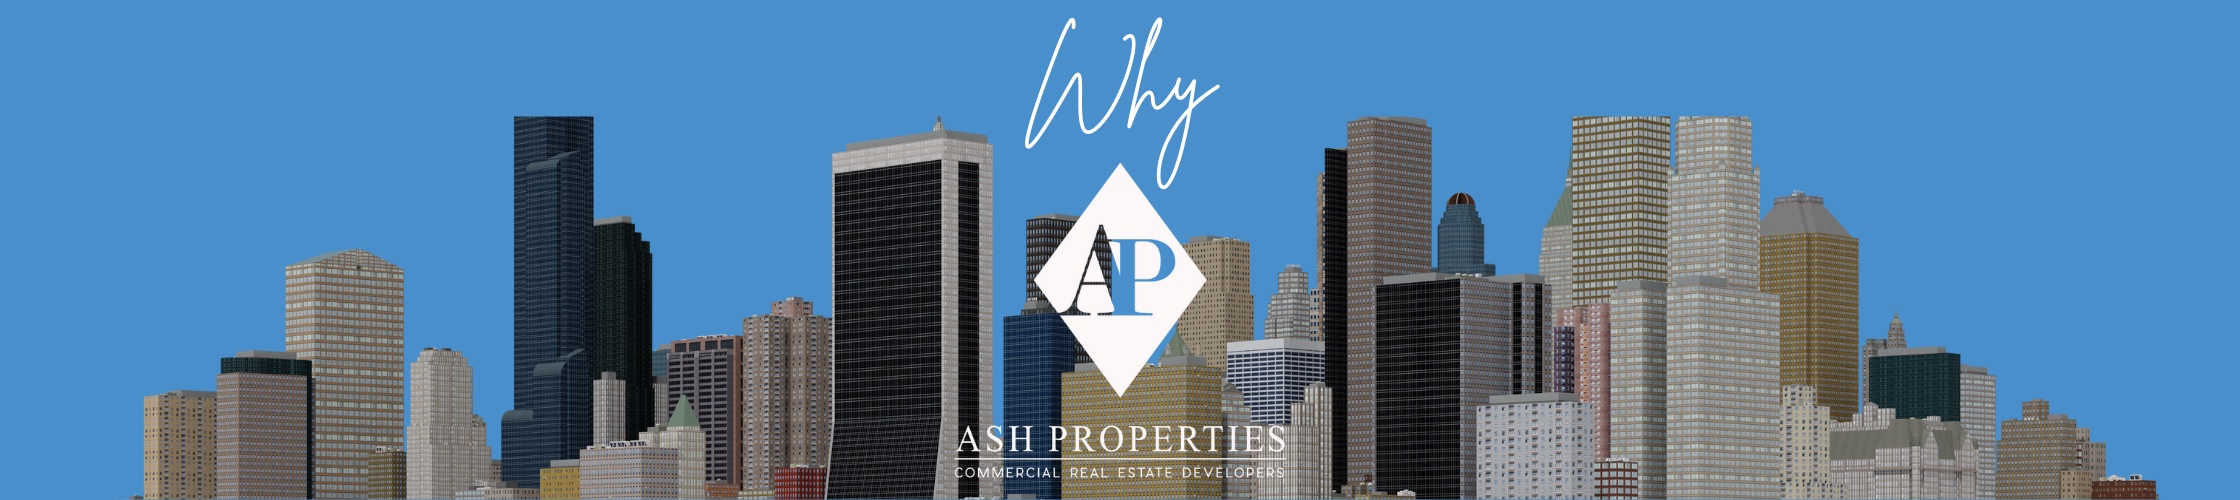 Why Ash Properties?